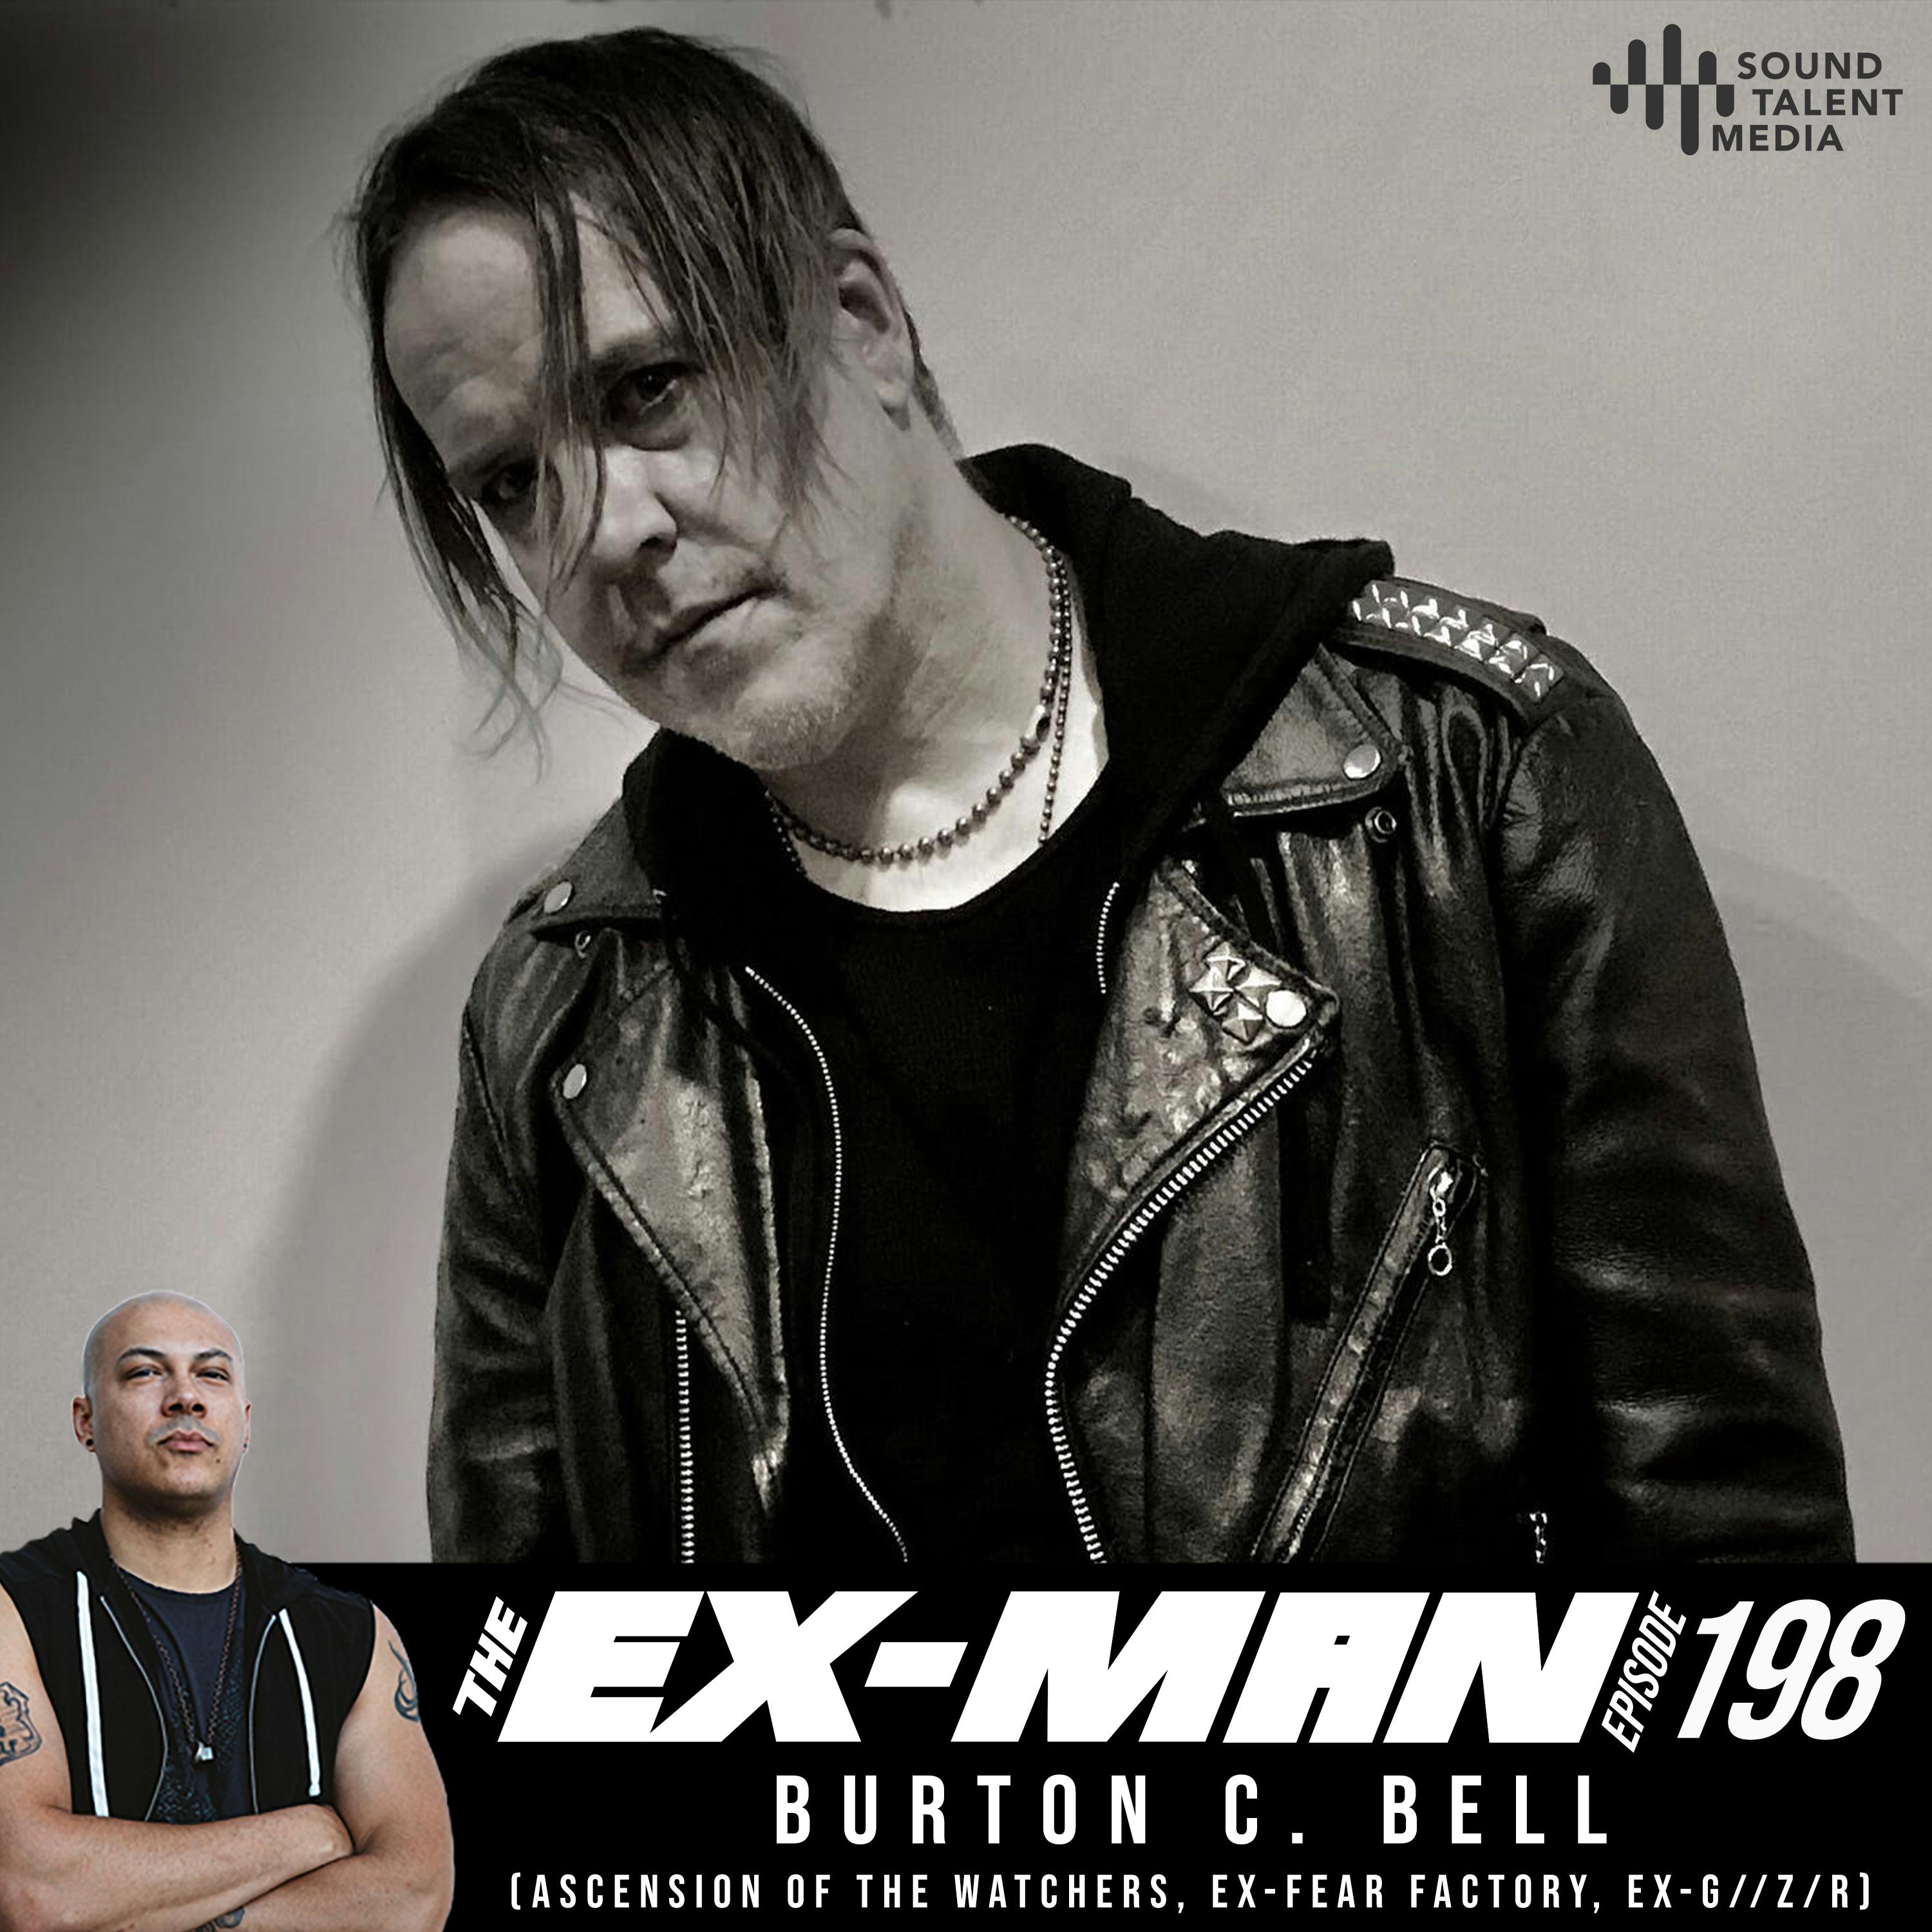 Burton C. Bell (Ascension Of The Watchers, ex-Fear Factory, ex-G//Z/R)